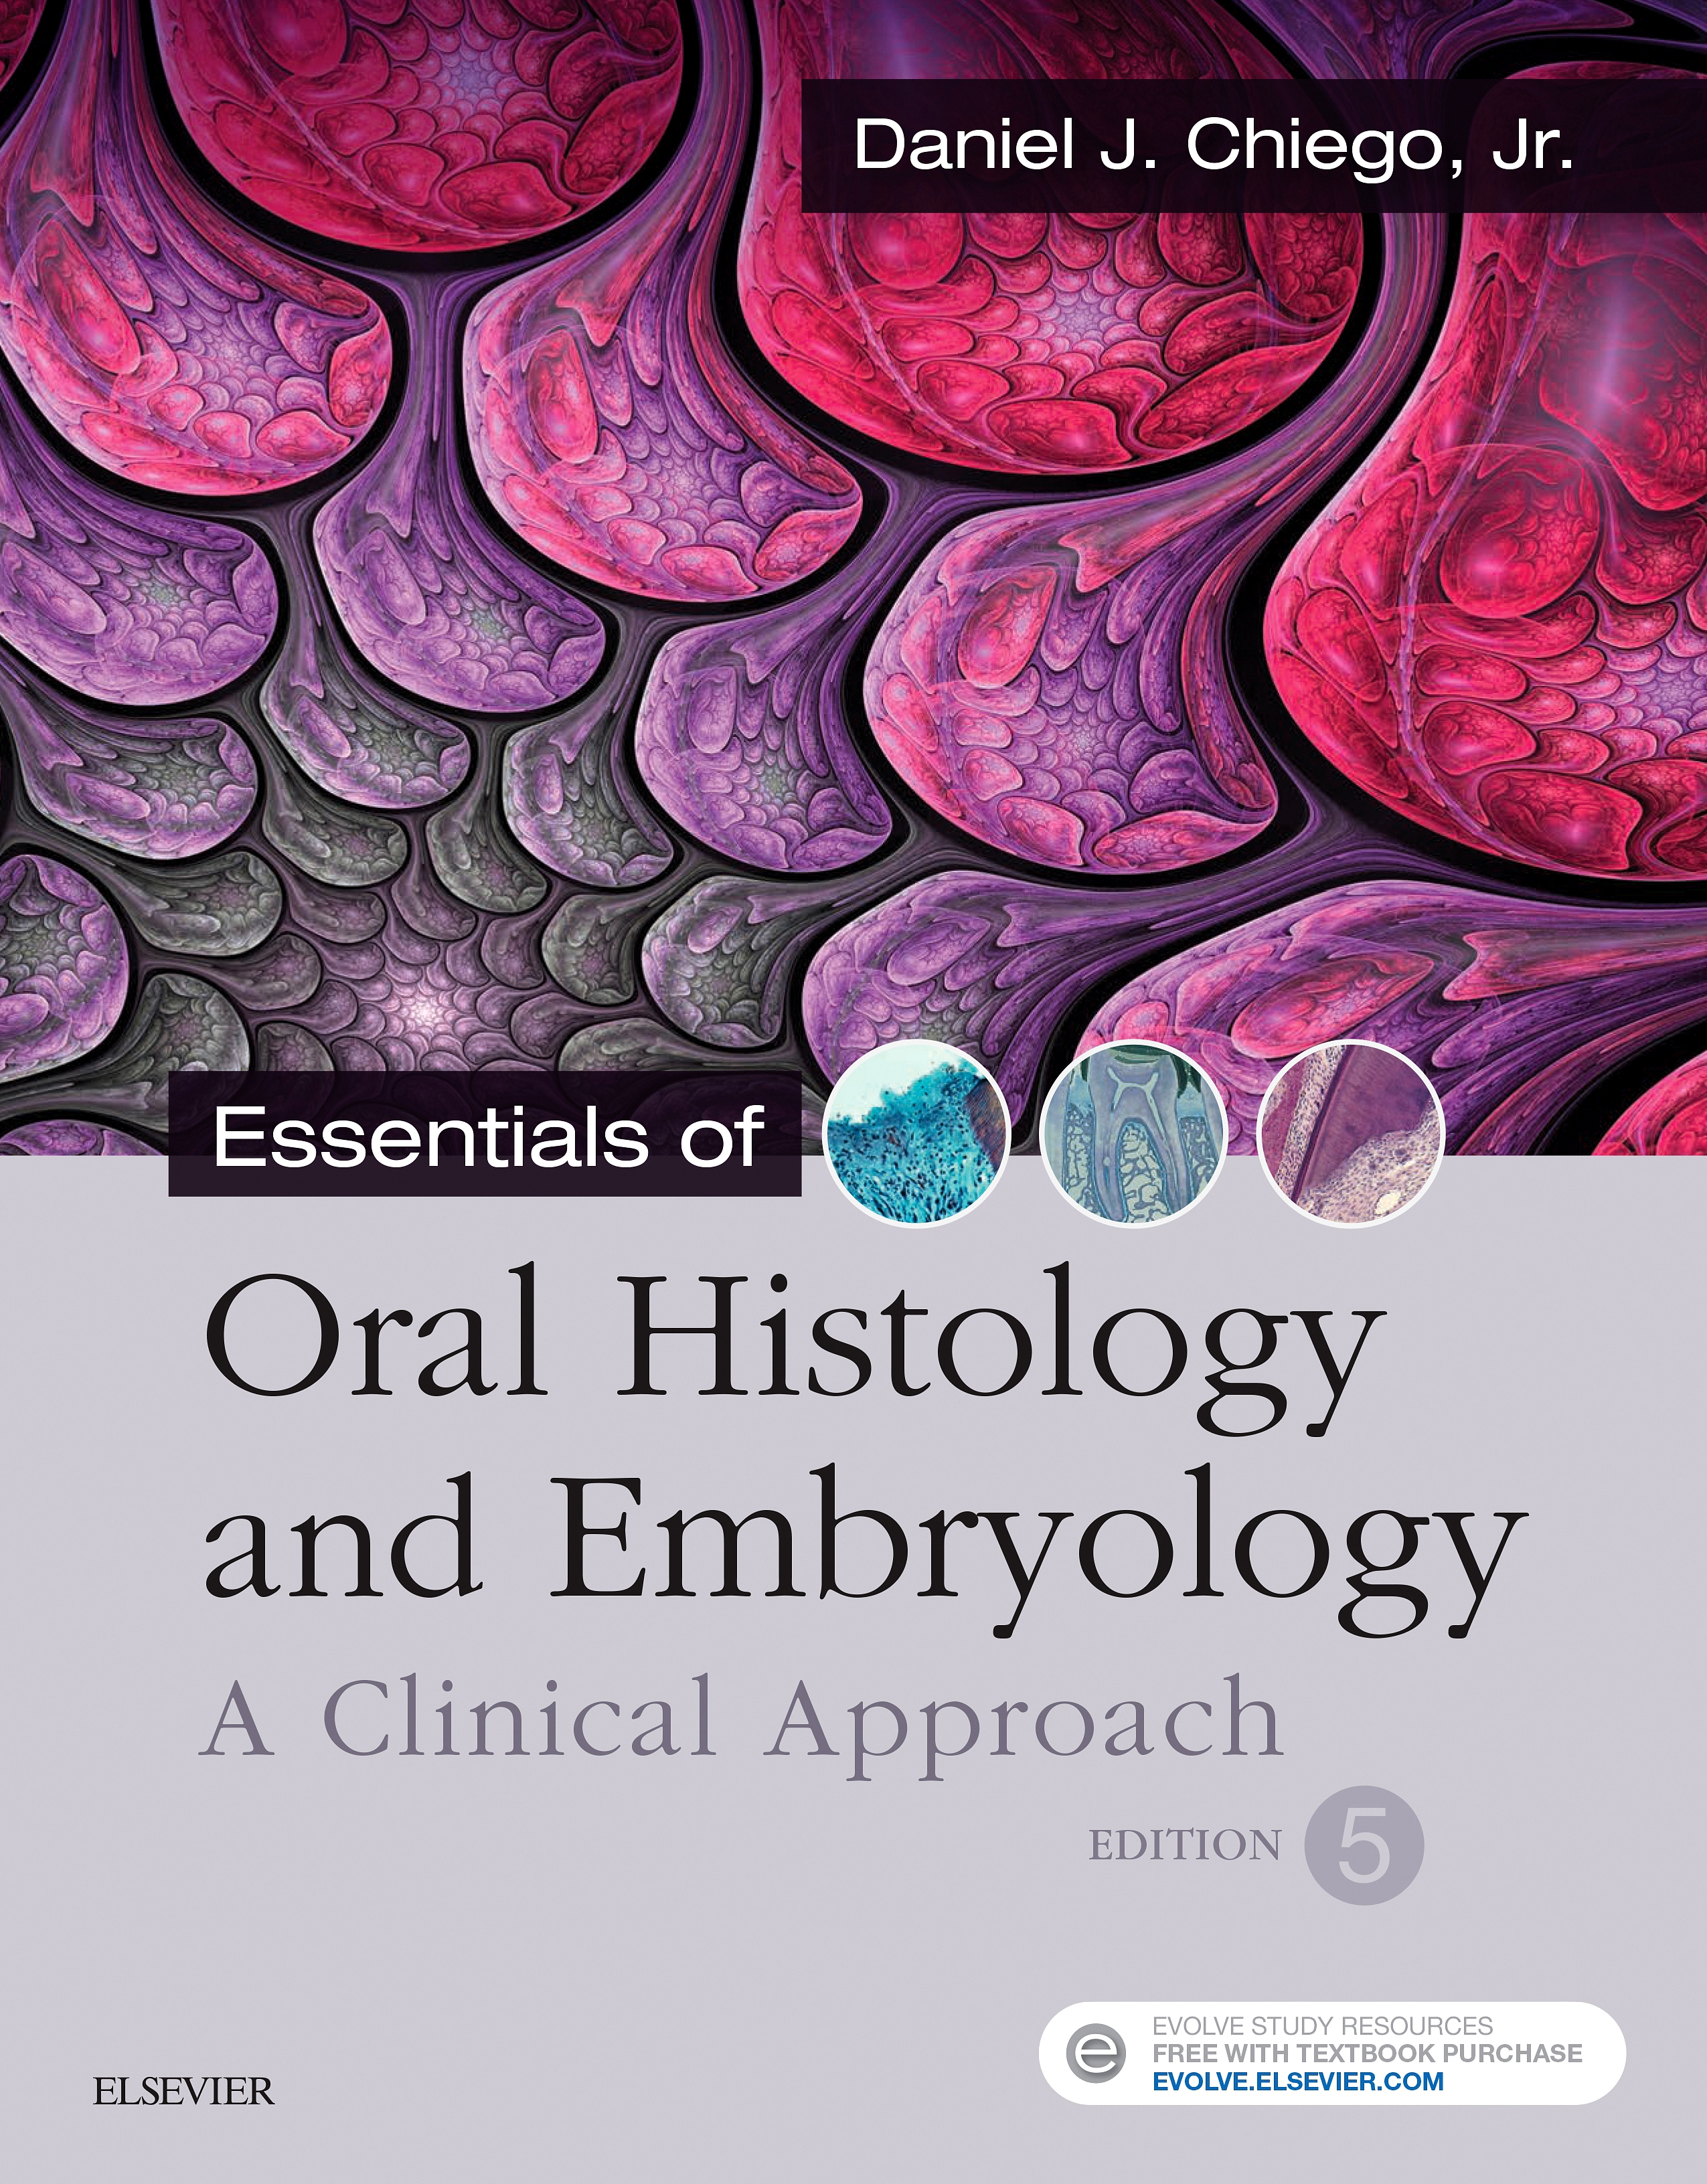 Evolve Resources for Essentials of Oral Histology and Embryology, 5th Edition